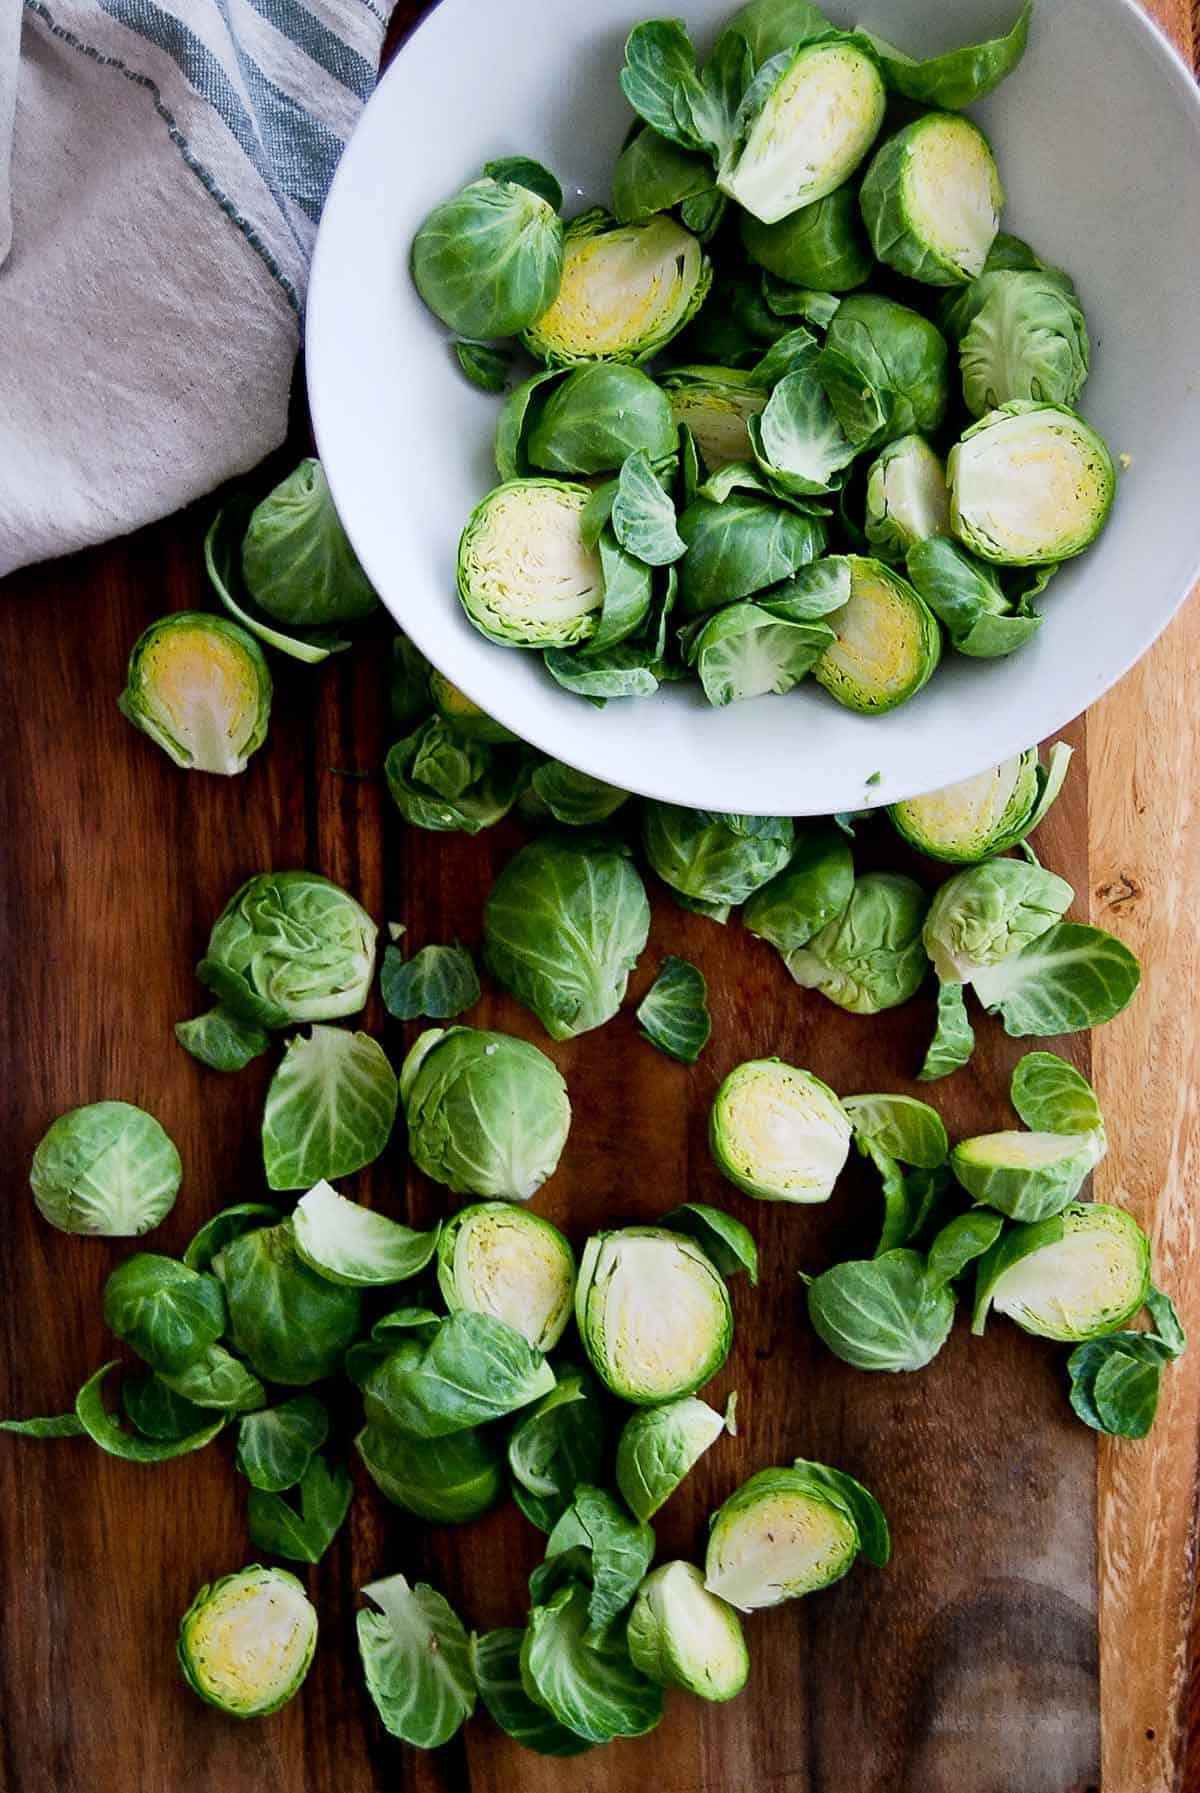 cut brussels sprouts on cutting board.